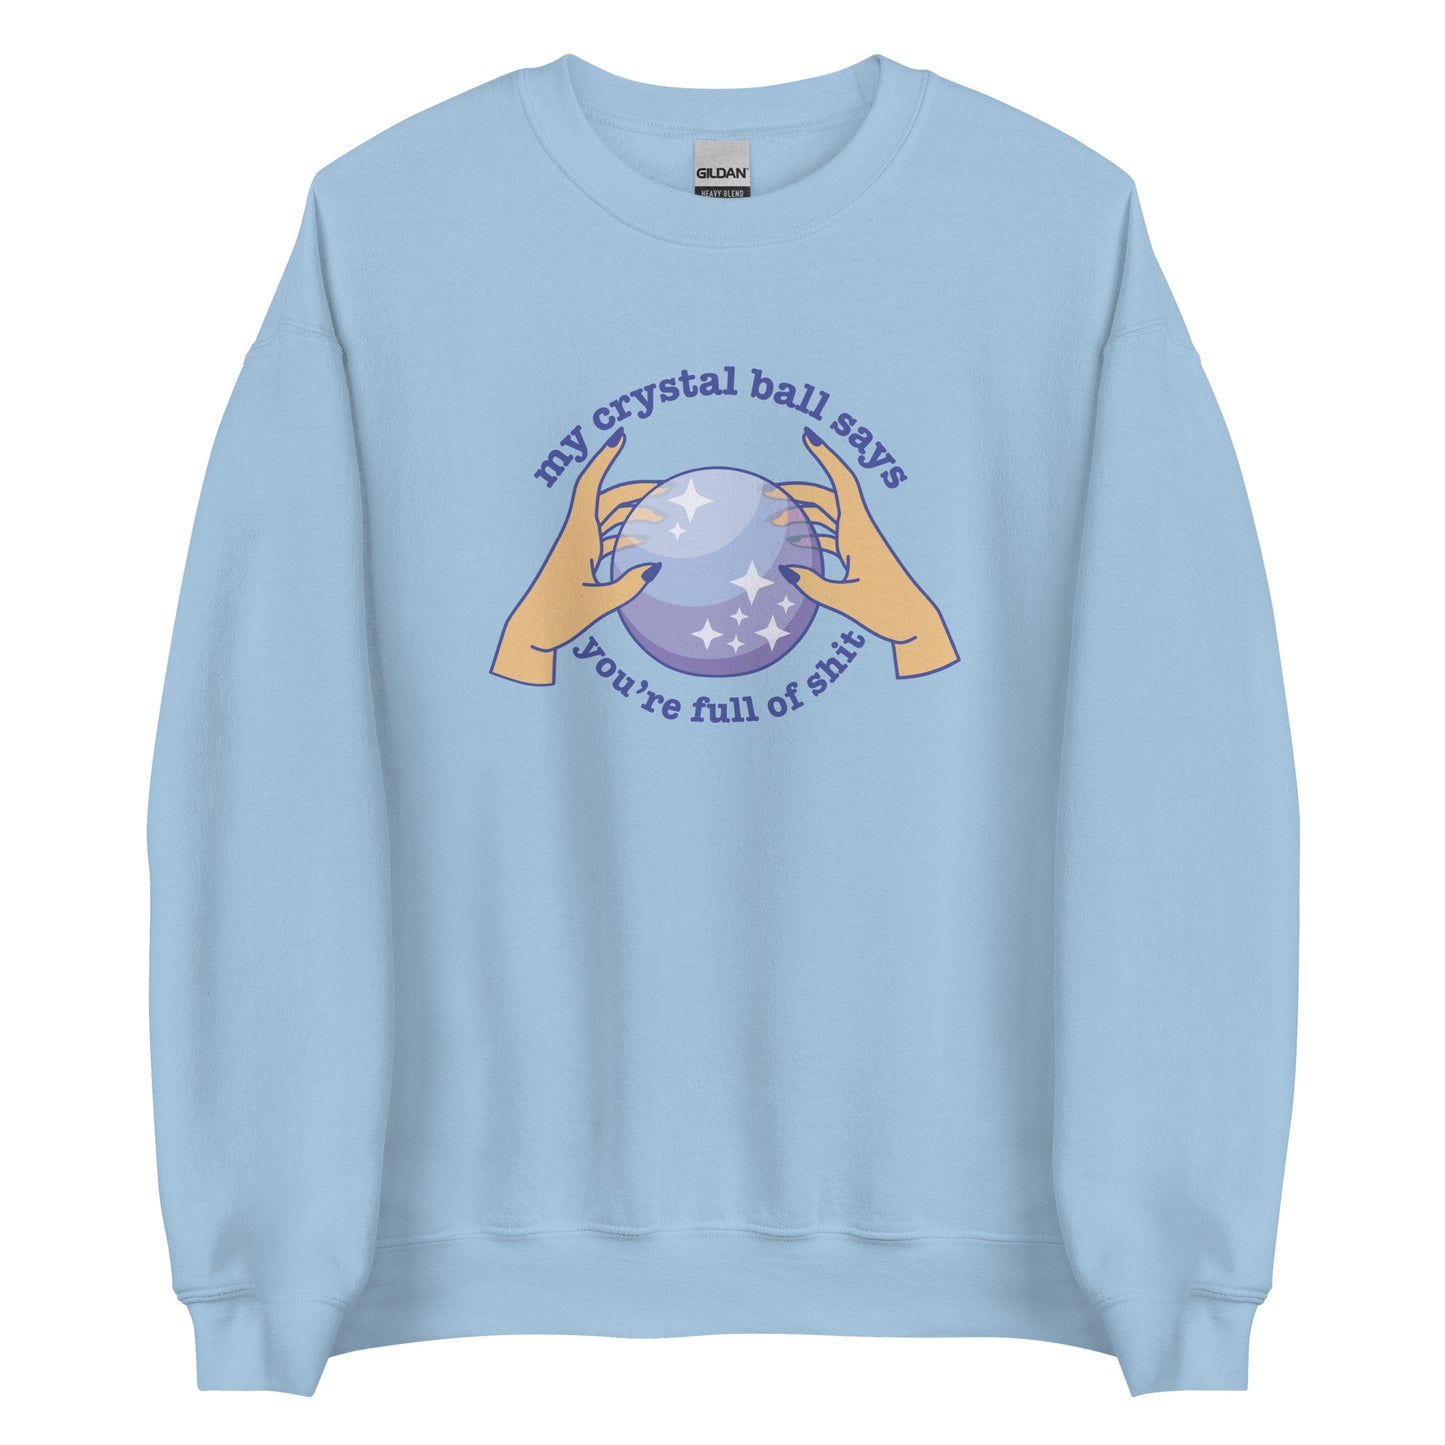 A light blue crewneck sweatshirt with a picture of hands on a crystal ball and text reading "My crystal ball says you're full of shit"